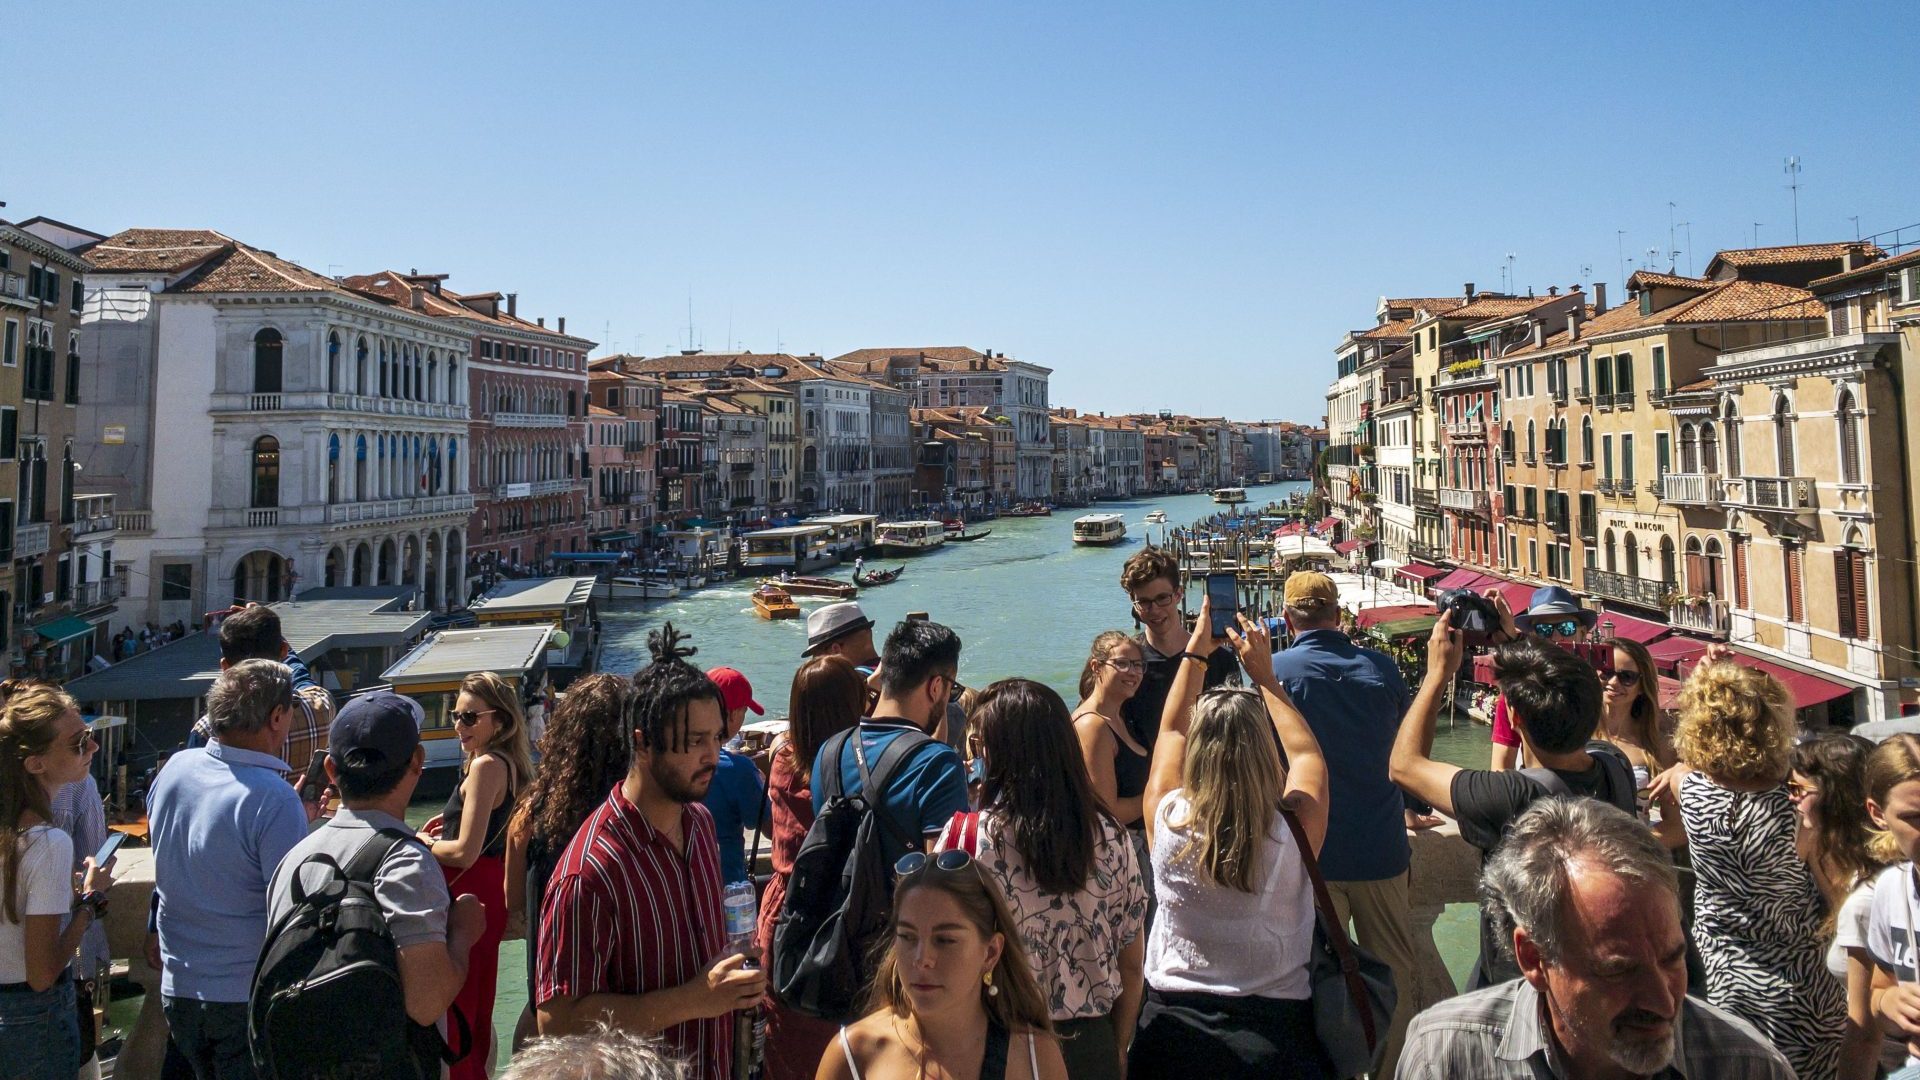 Tourists throng the Rialto Bridge overlooking the Grand Canal. Photo: Jumping Rocks/Education Images/Universal Images Group